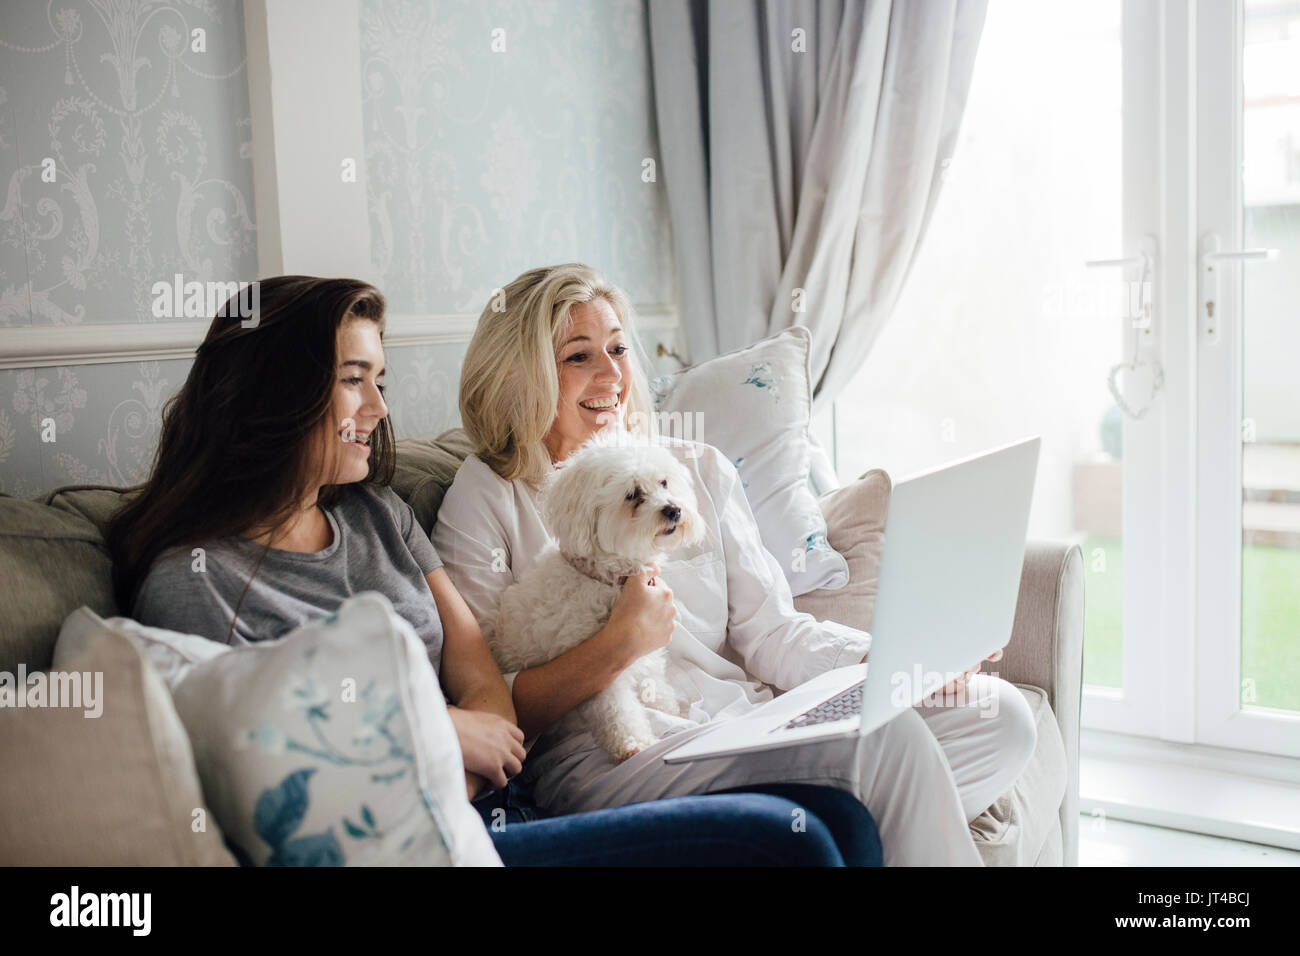 Mother and her daughter video calling someone on their laptop. They are smiling and waving at the screen. Their dog is sitting with them. Stock Photo